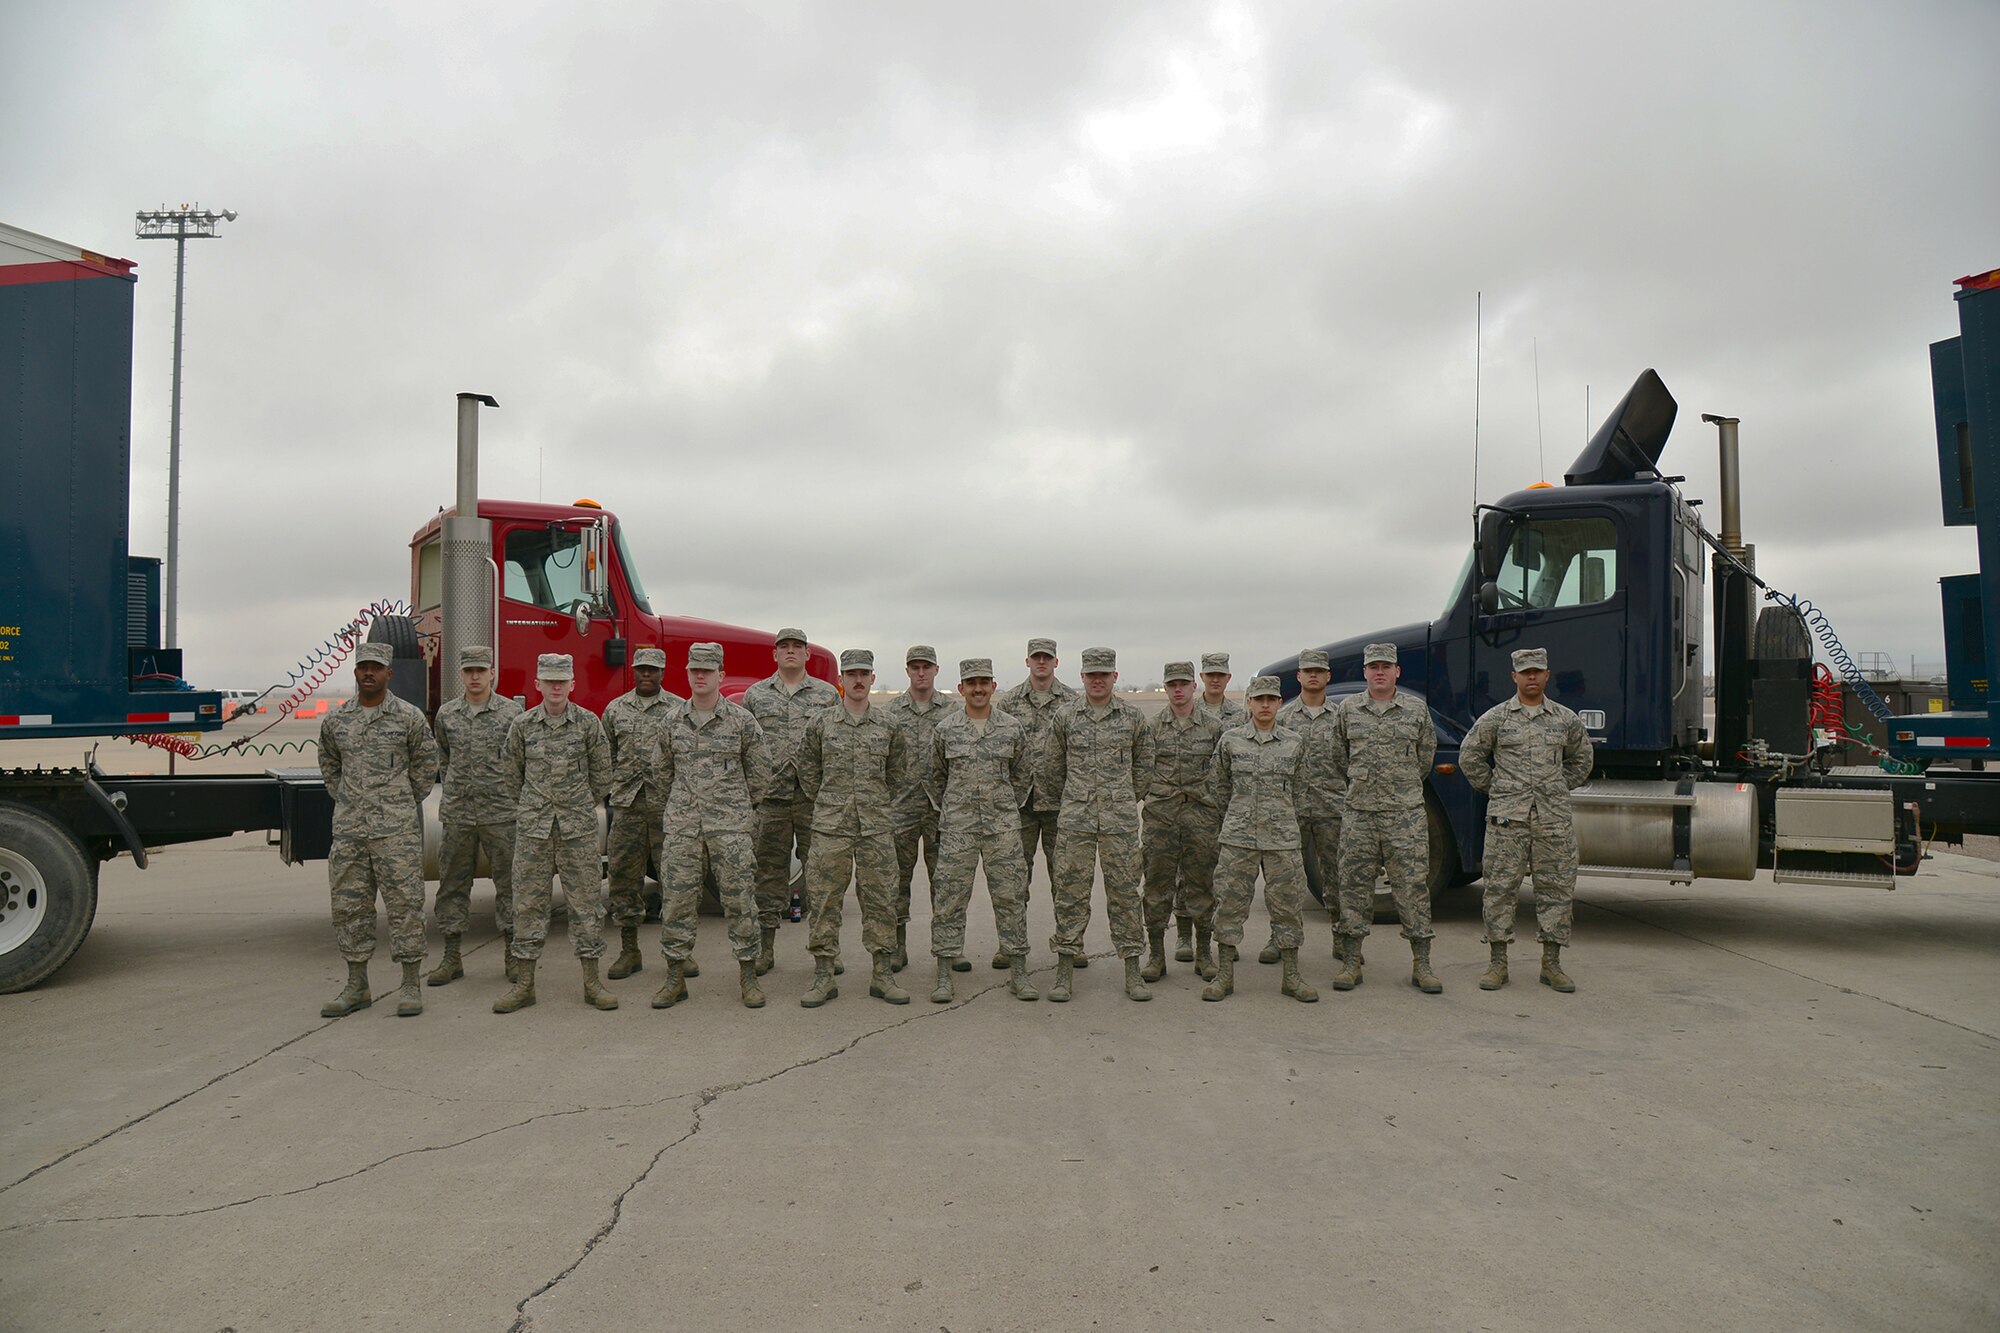 Airmen from the 341st Missile Maintenance Squadron Periodic Maintenance Team pose for a group photo March 29, 2016, at Malmstrom Air Force Base, Mont. The 341st MMXS PMT is one of many teams that contributed toward the 341st Maintenance Group 2016 Air Force Maintenance Effectiveness Award. (U.S. Air Force photo/Airman First Class Daniel Brosam)